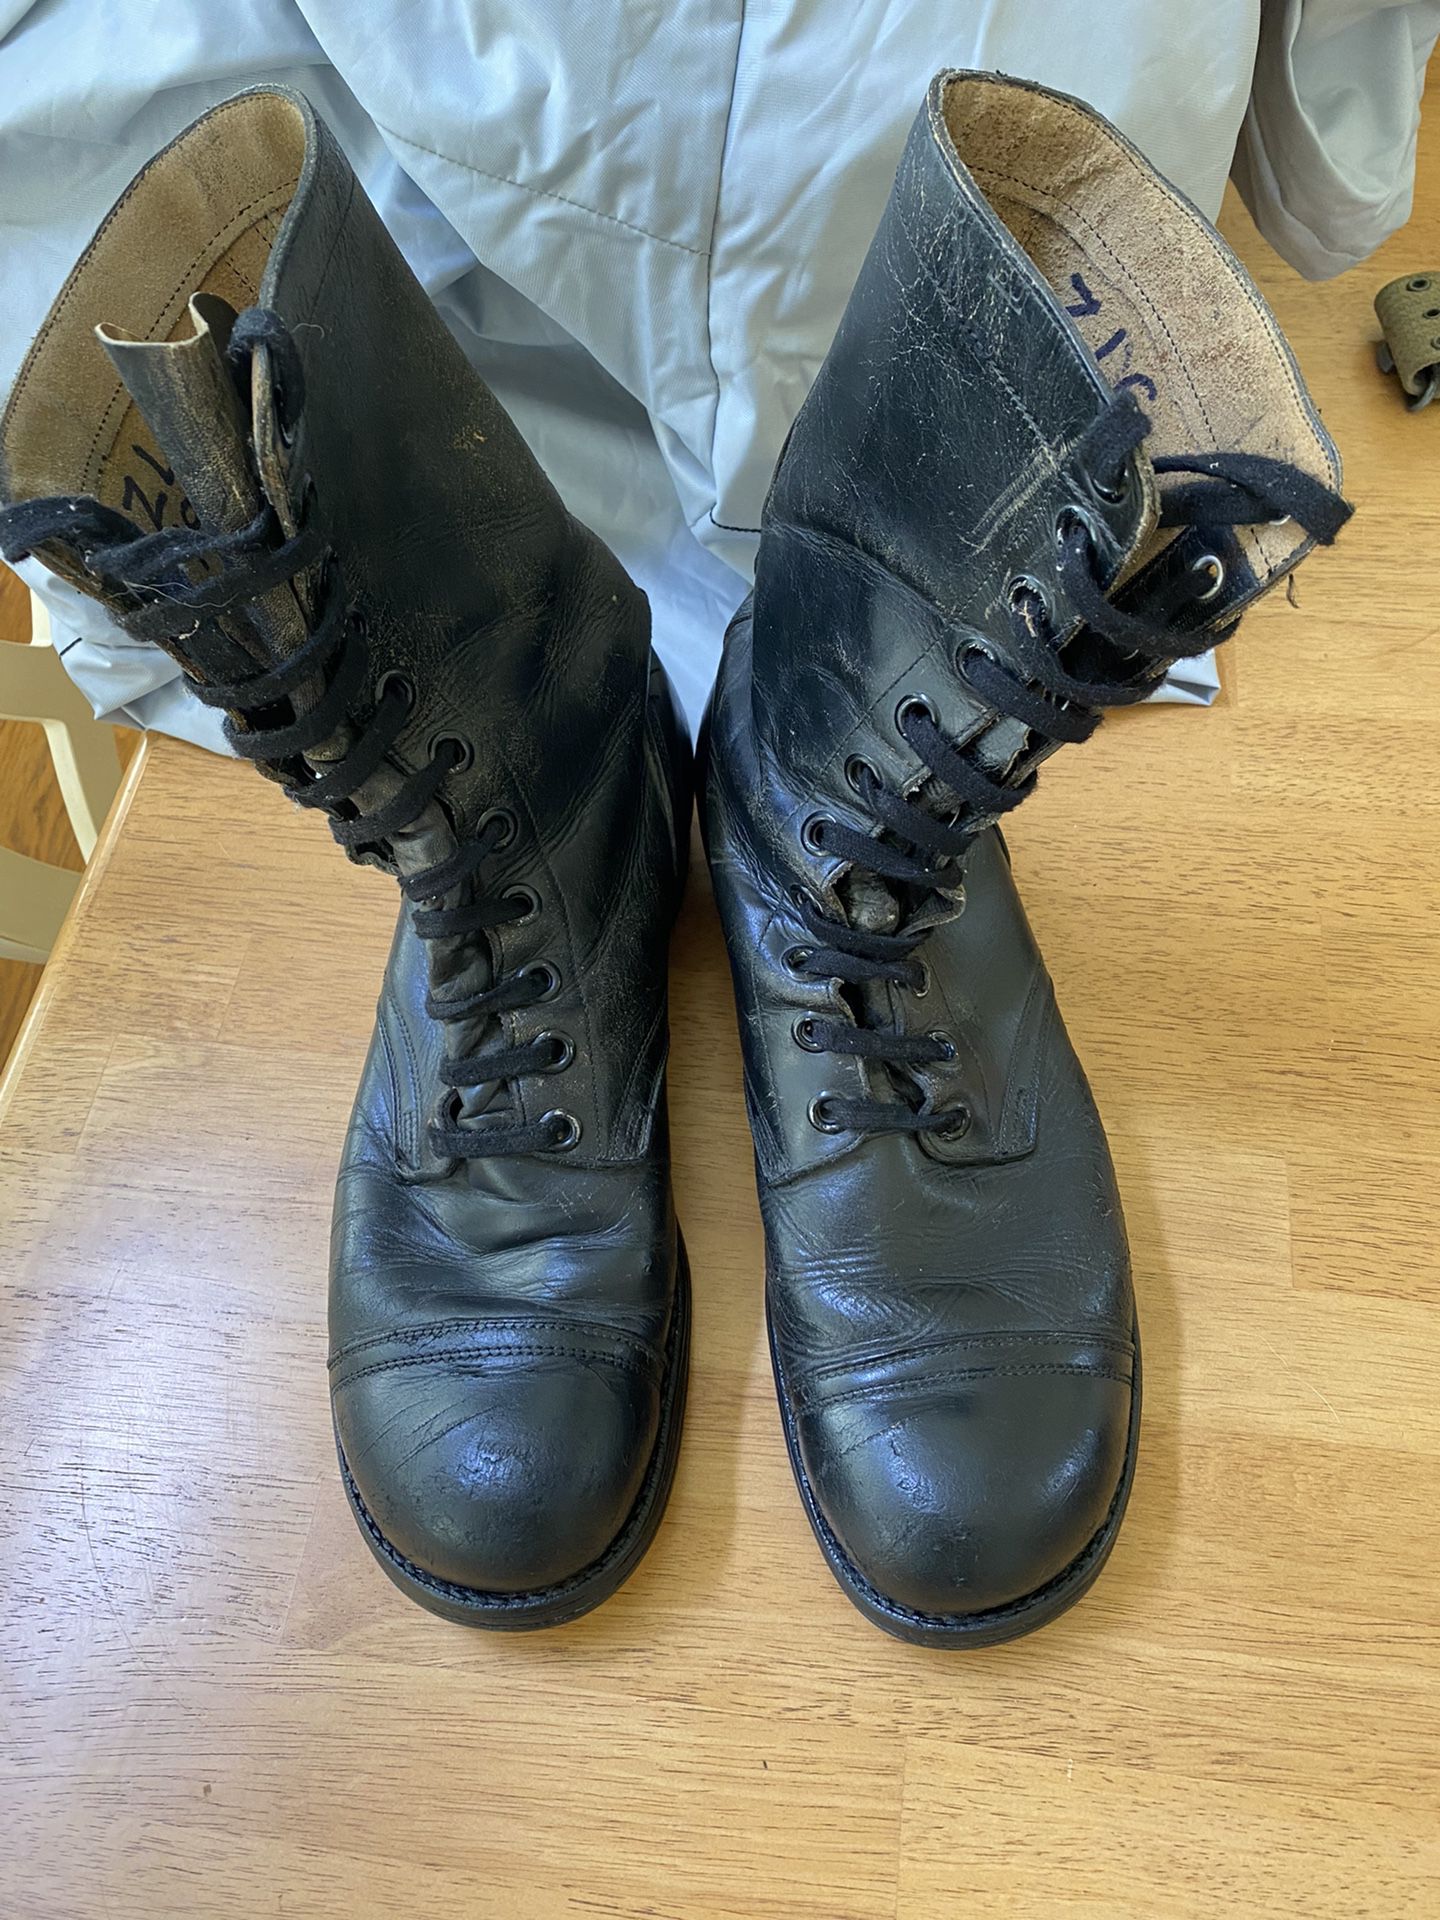 Vintage Army Boots